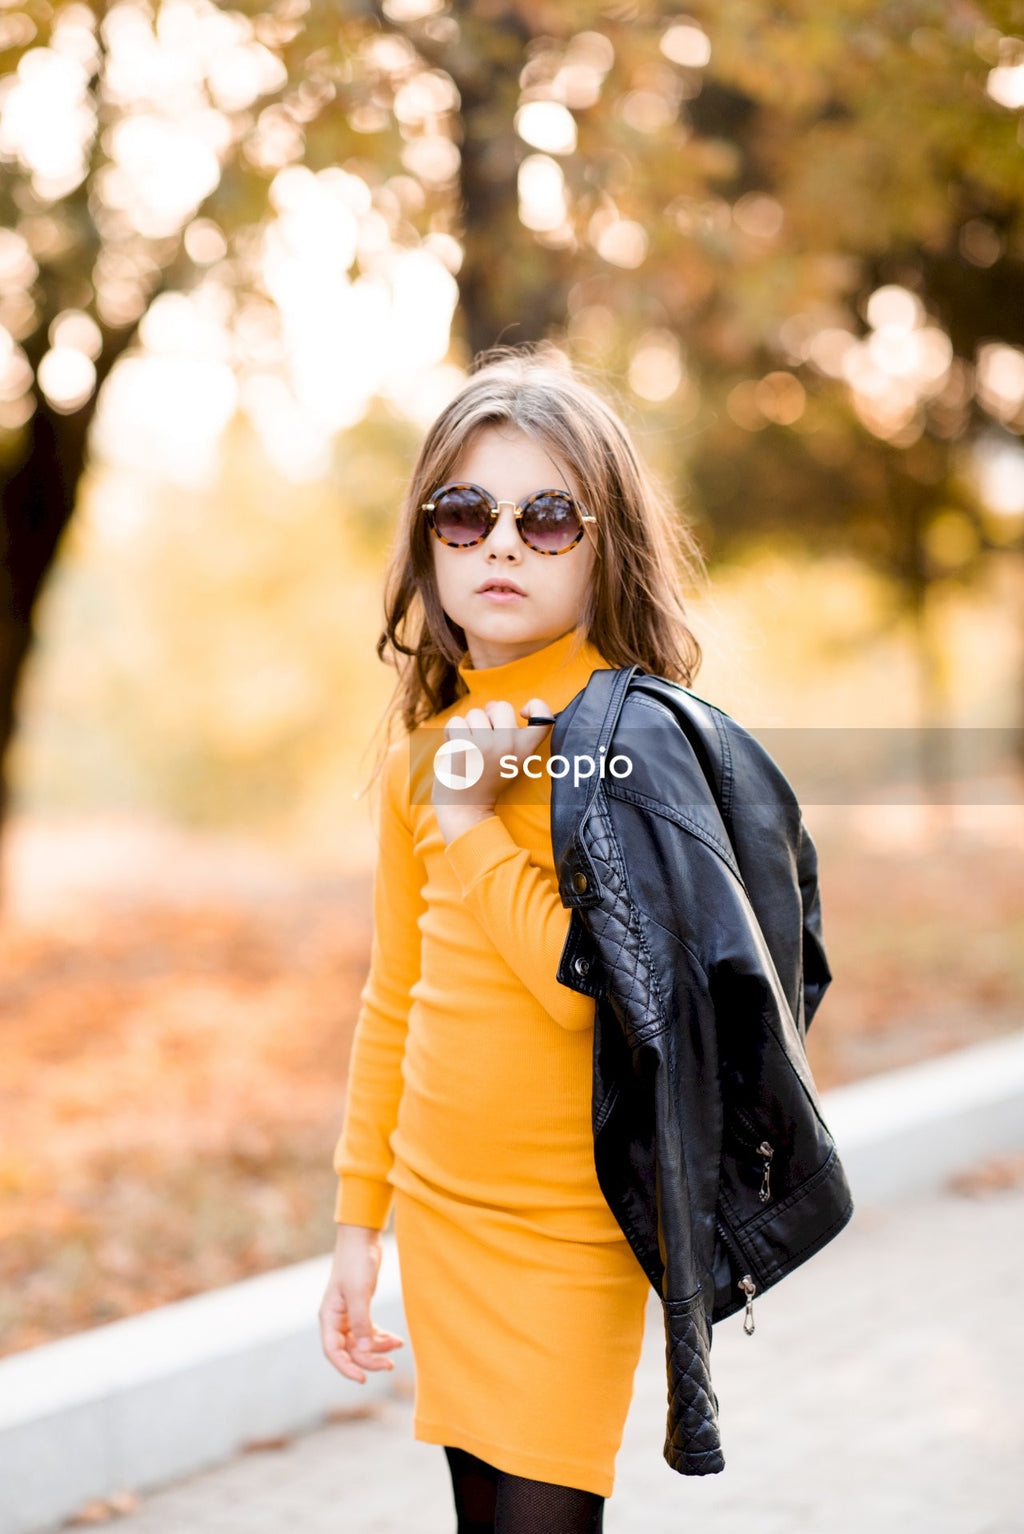 Woman in yellow long sleeve shirt and black scarf wearing black sunglasses